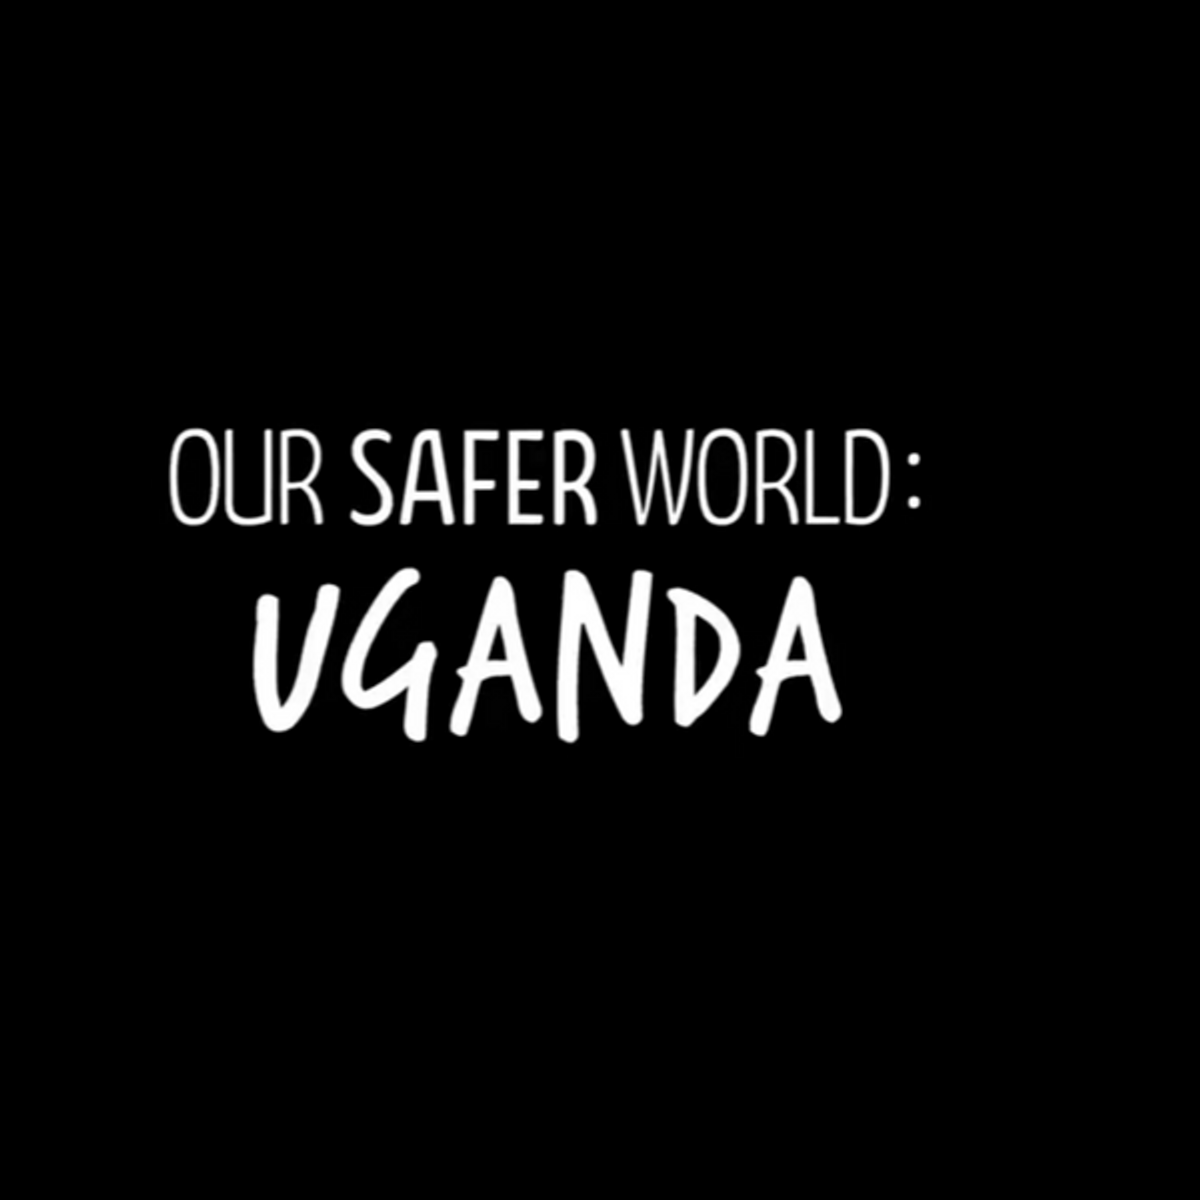 Be The Change You Want To See: How One Company Works To Keep Uganda Safe and Sound